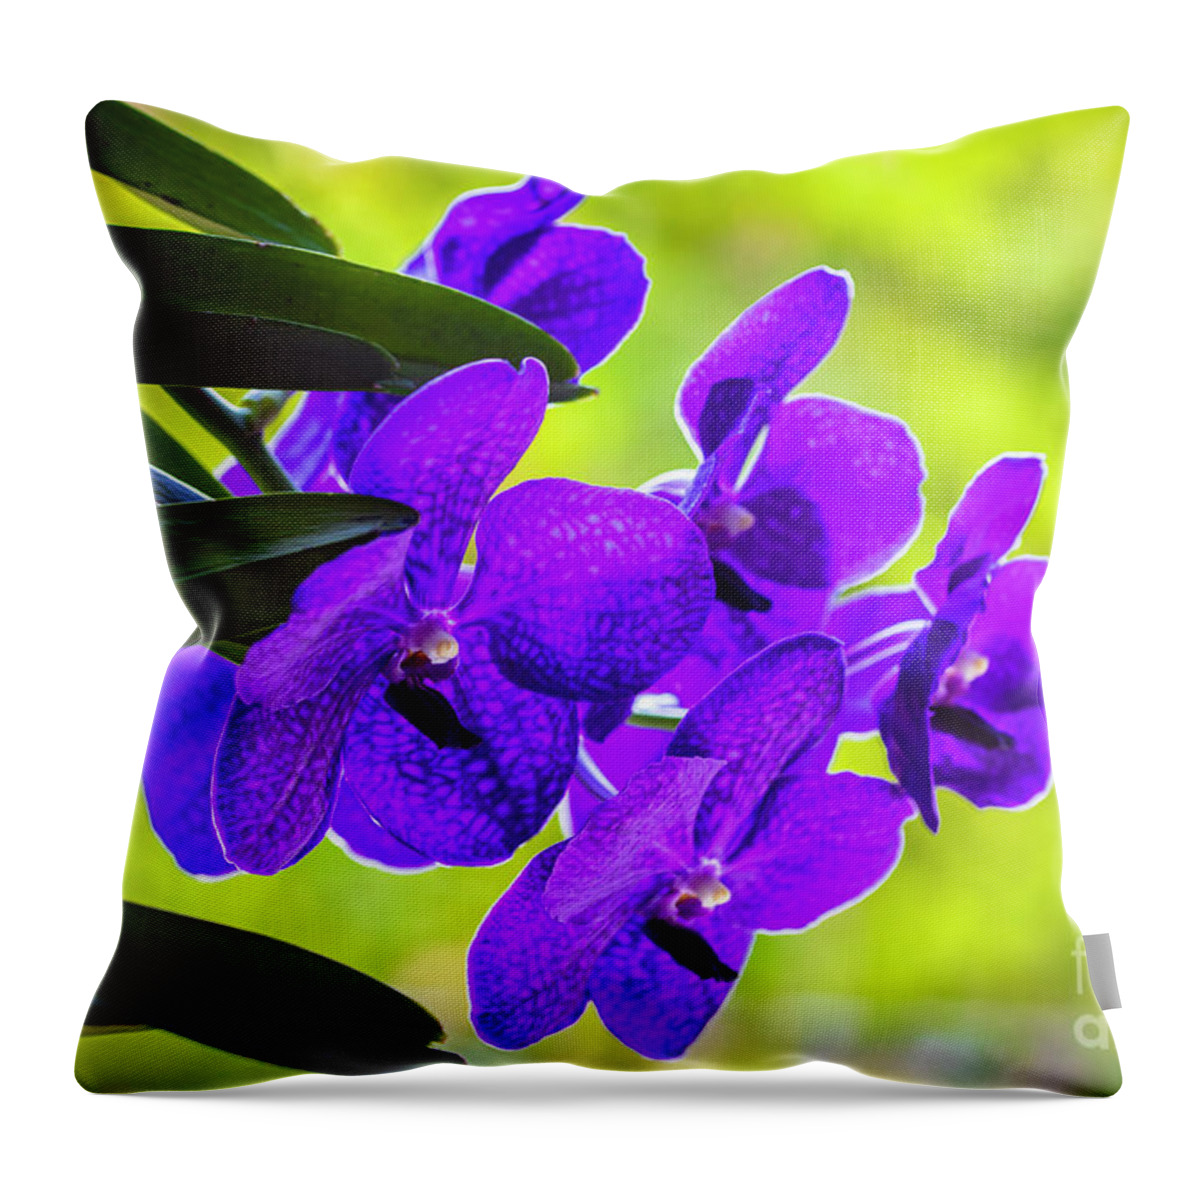 Background Throw Pillow featuring the photograph Purple Orchid Flowers #33 by Raul Rodriguez